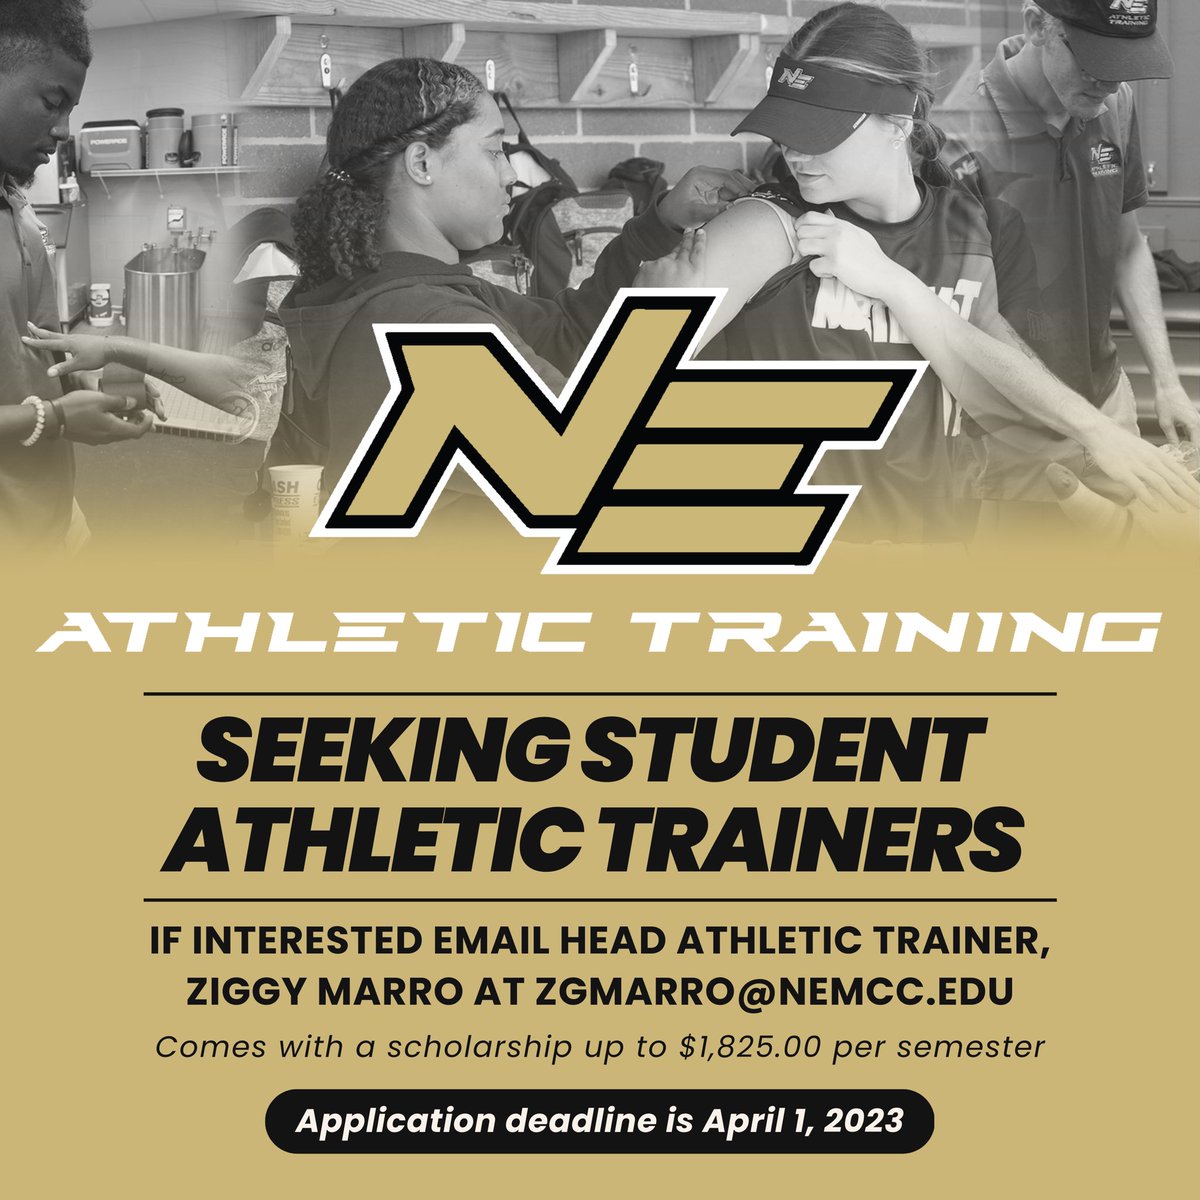 Current & Prospective NEMCC students! We’re looking for student athletic trainers for the 2023-2024 academic school year. If interested PM us or email our Head Athletic Trainer, Ziggy Marro at zgmarro@nemcc.edu ‼️